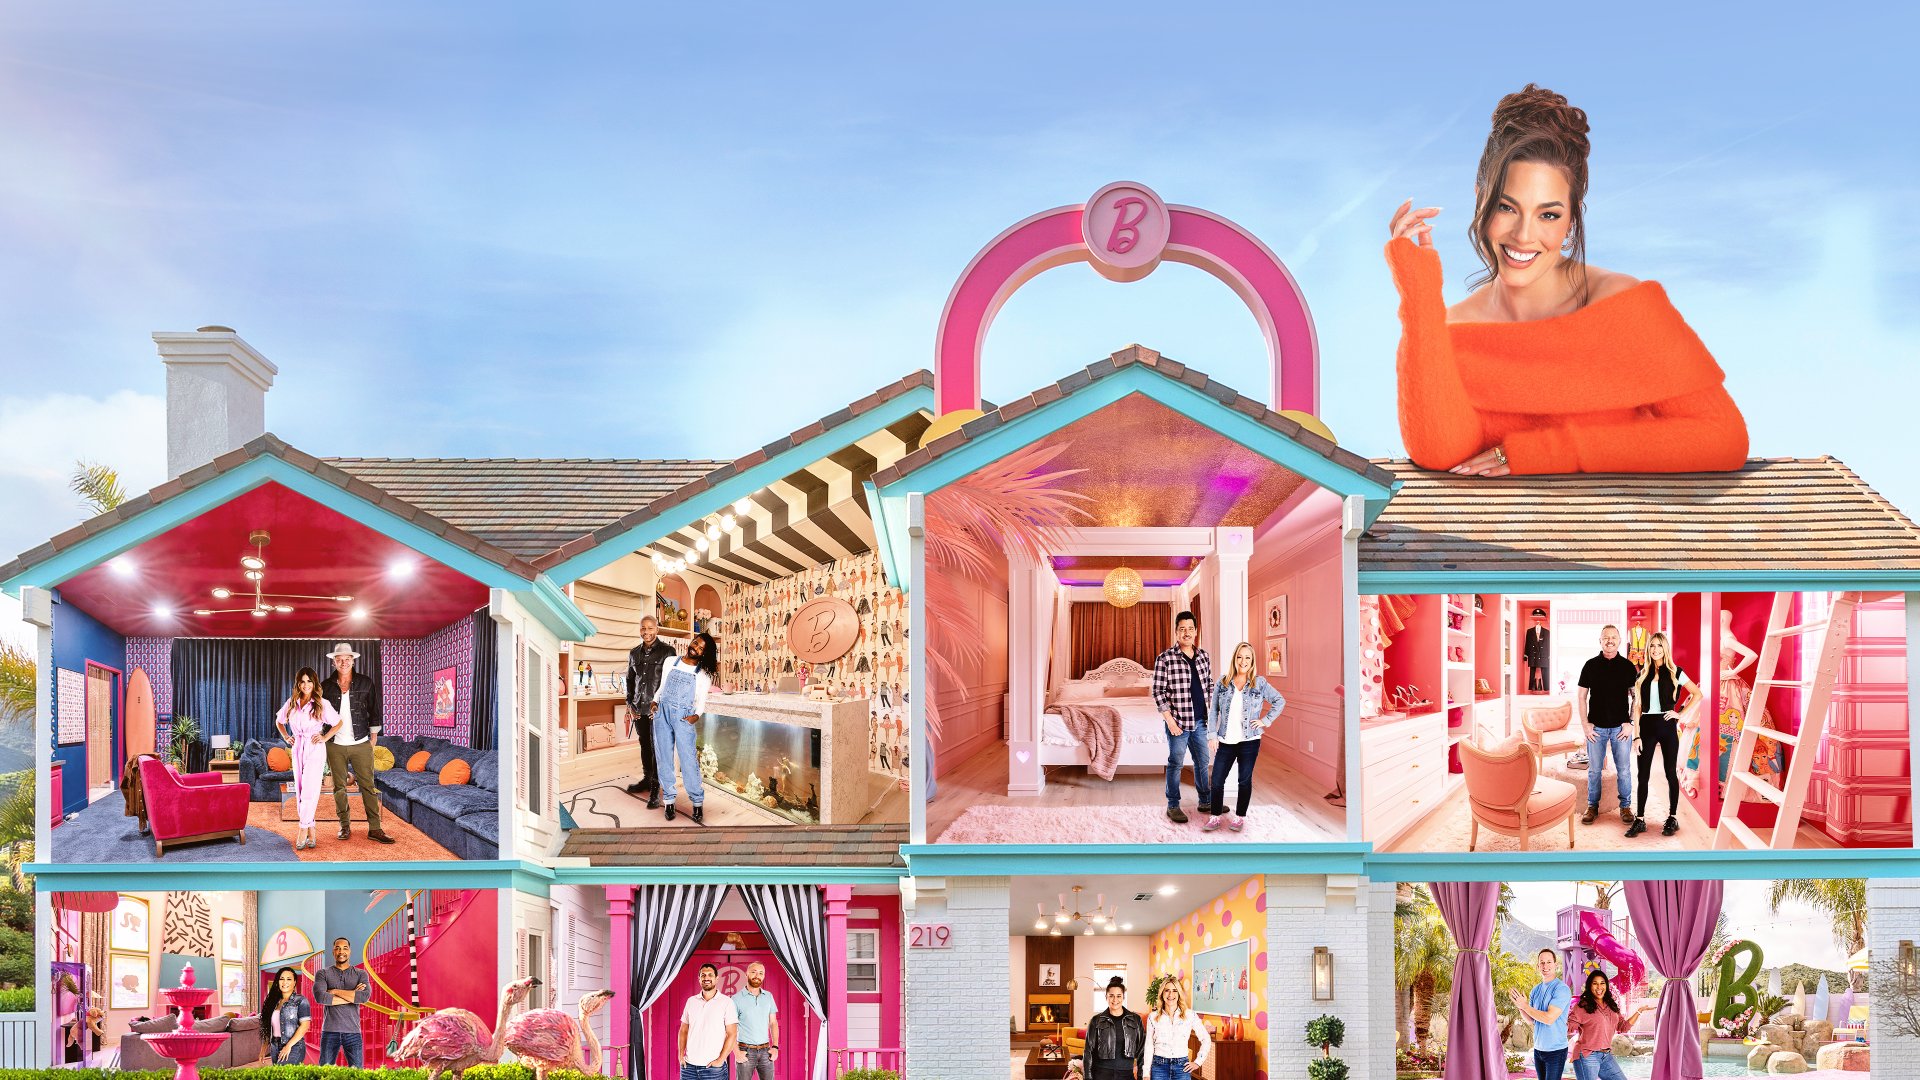 HGTV's Barbie Dreamhouse Challenge—Here's What You Need to Know